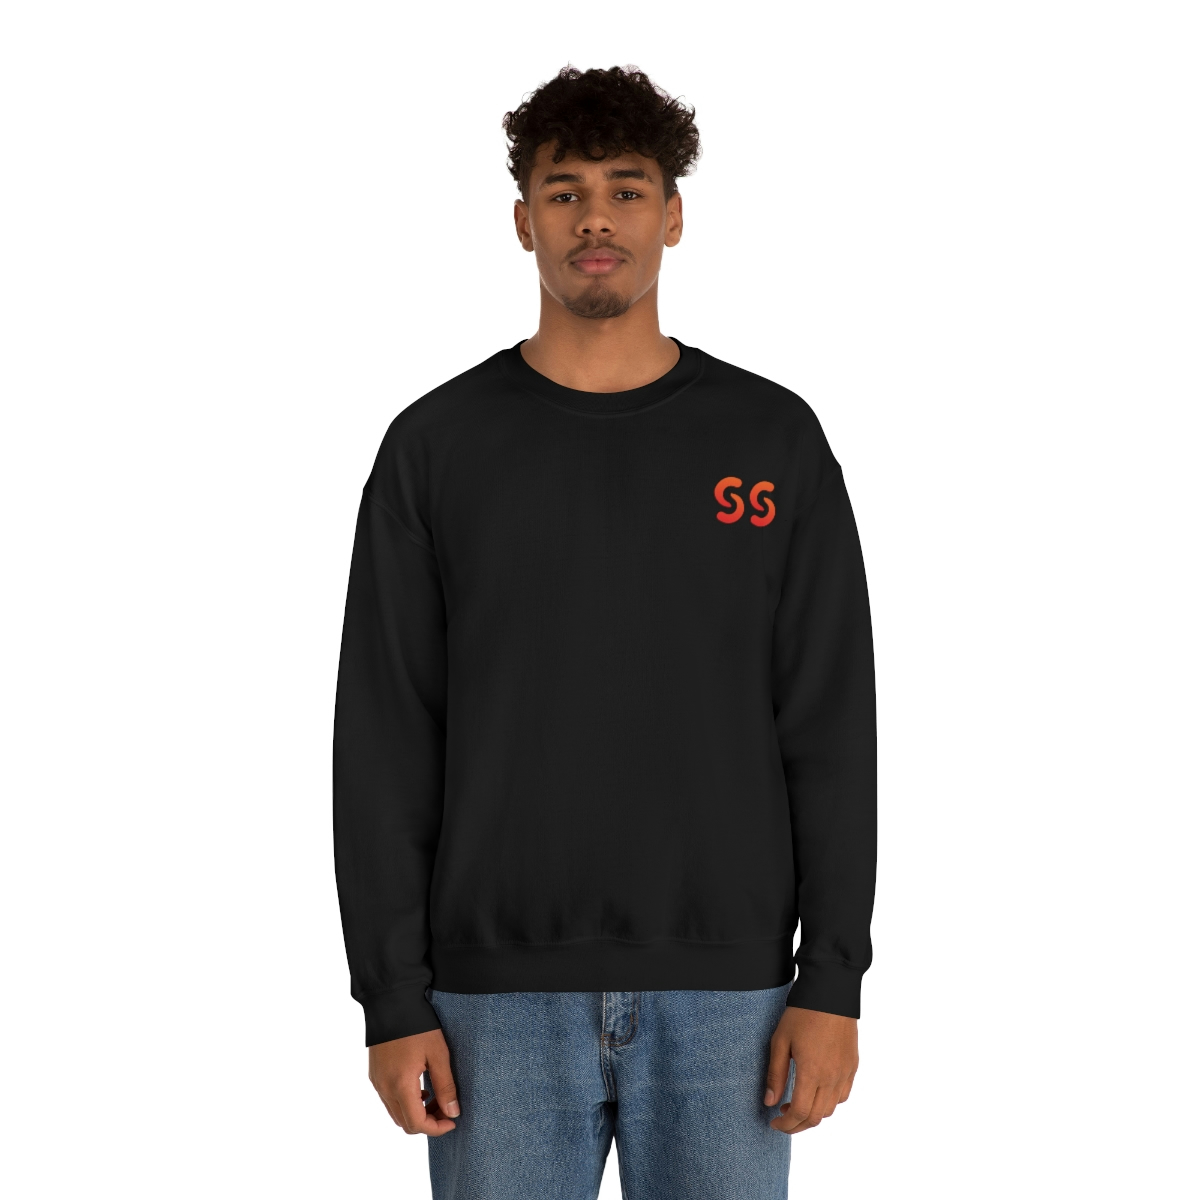 A young medium skin tone male model wearing a black sweatshirt with stylized "SS" over the left breast denoting sickle cell trait status.